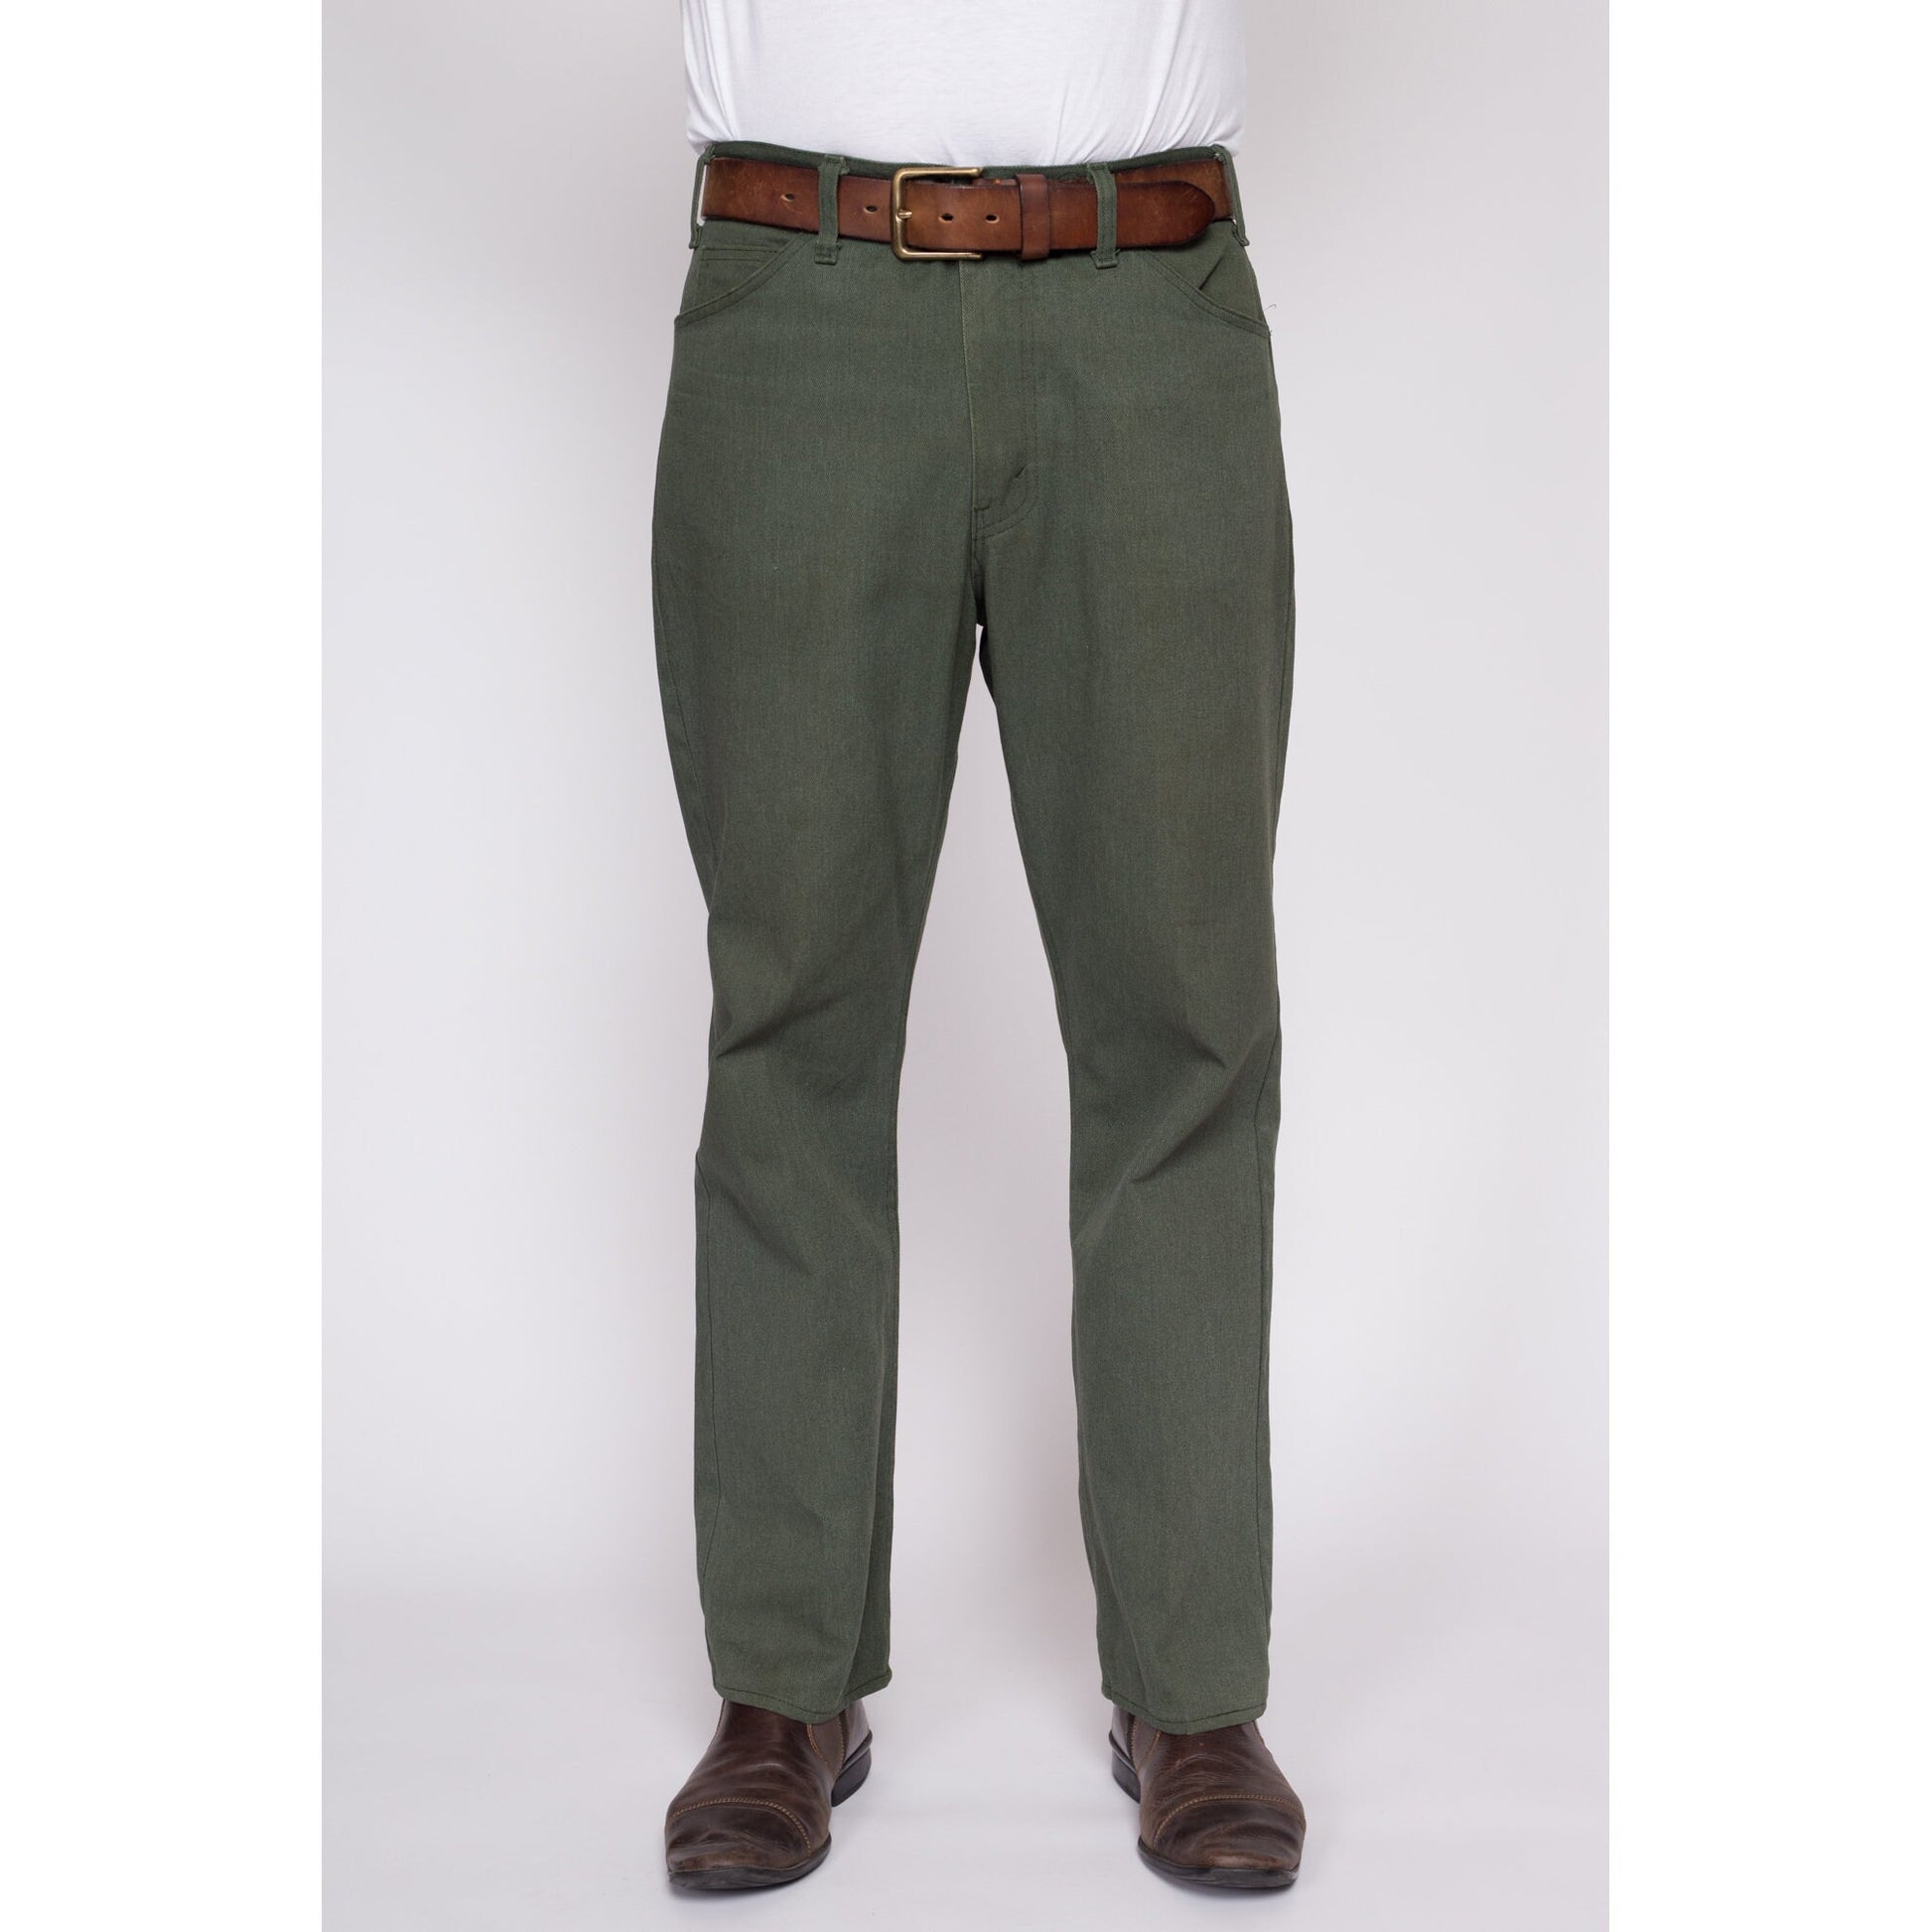 34x29 70s Sage Green Trousers | Vintage Men's Twill Bootcut Pants